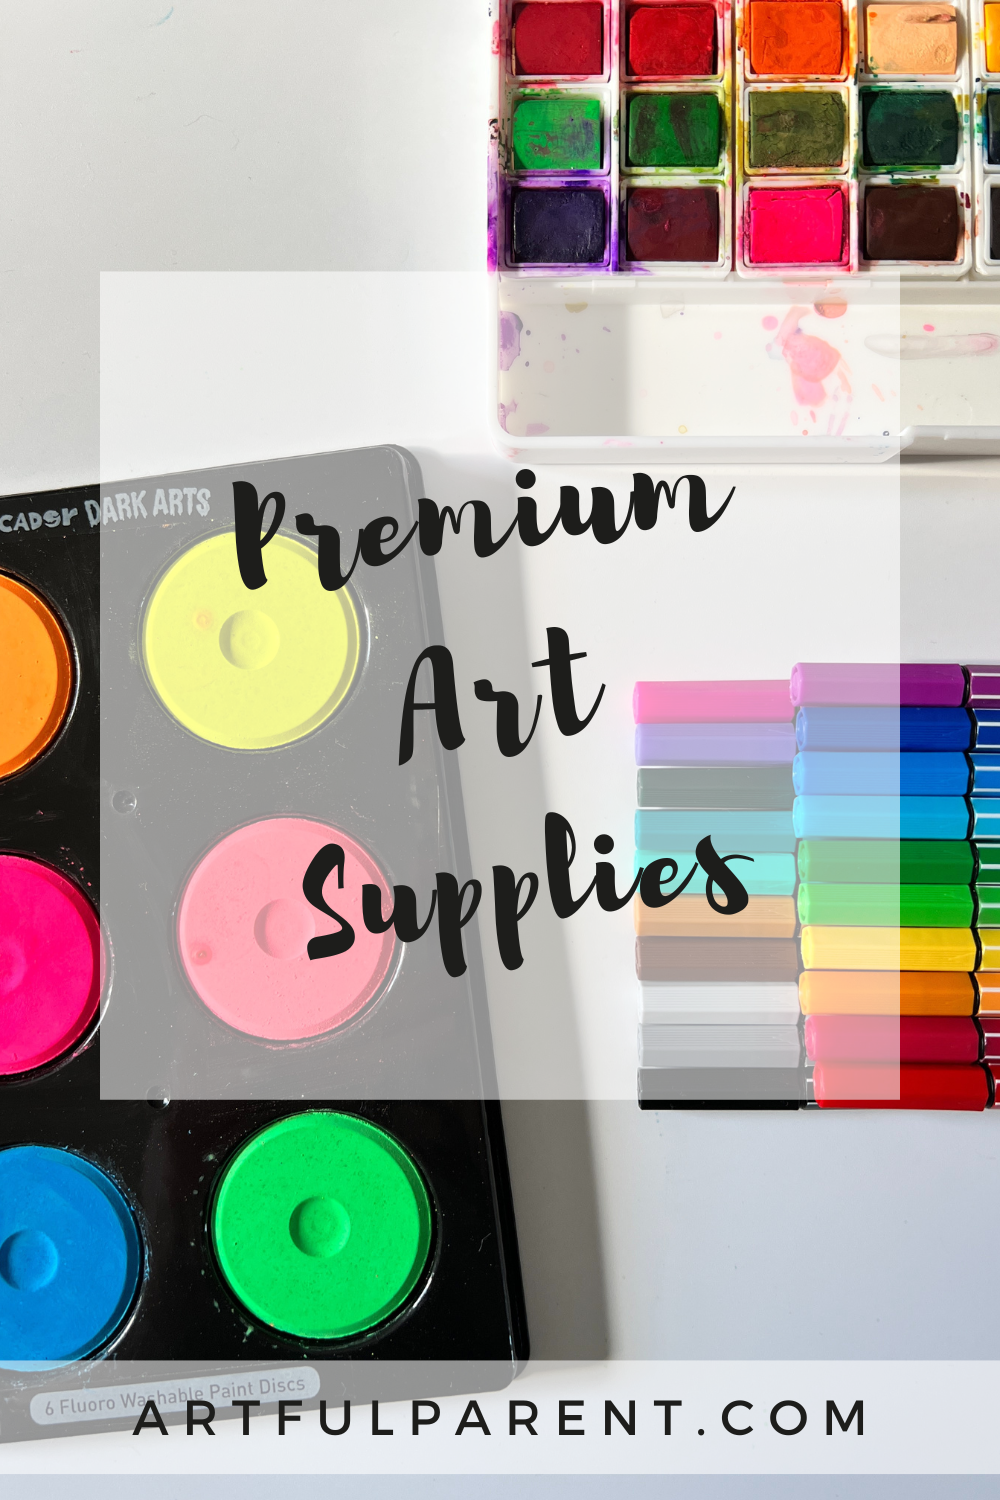 5 Premium Art Supplies for Gifts